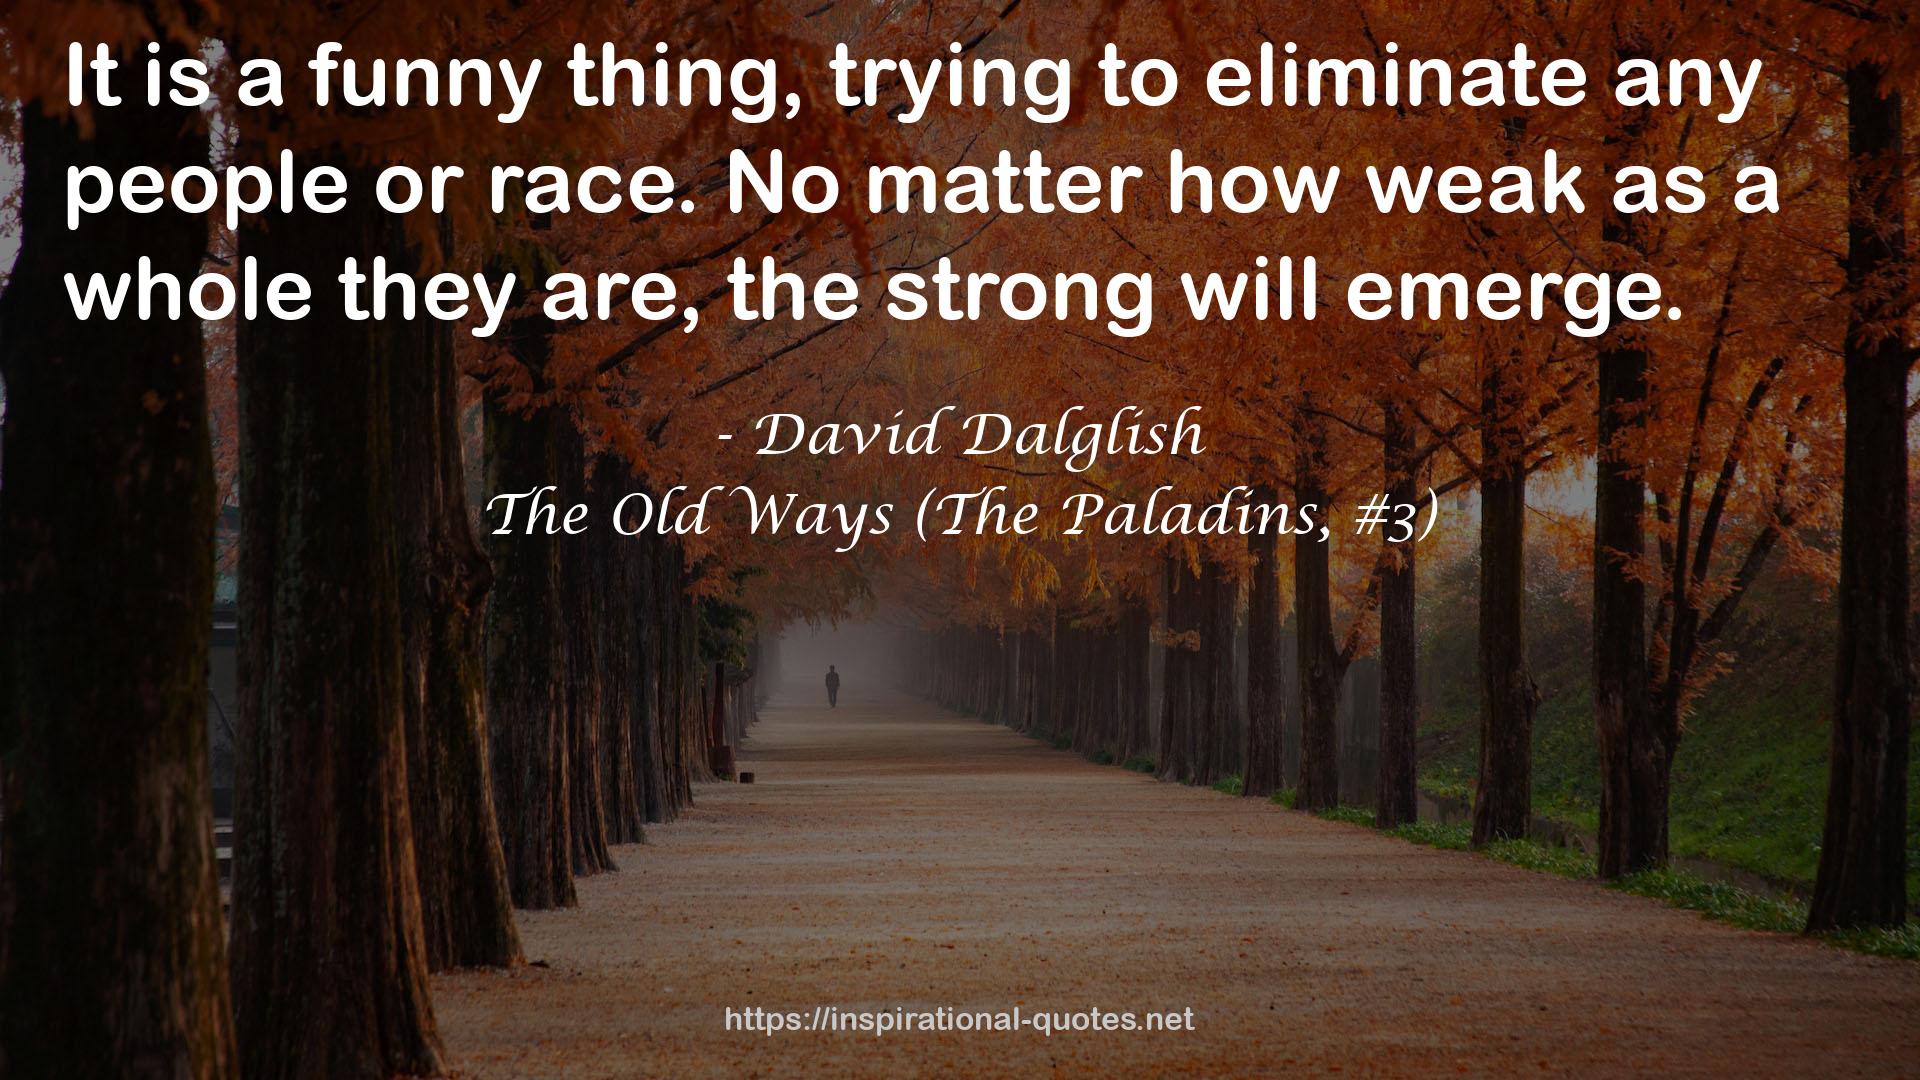 The Old Ways (The Paladins, #3) QUOTES